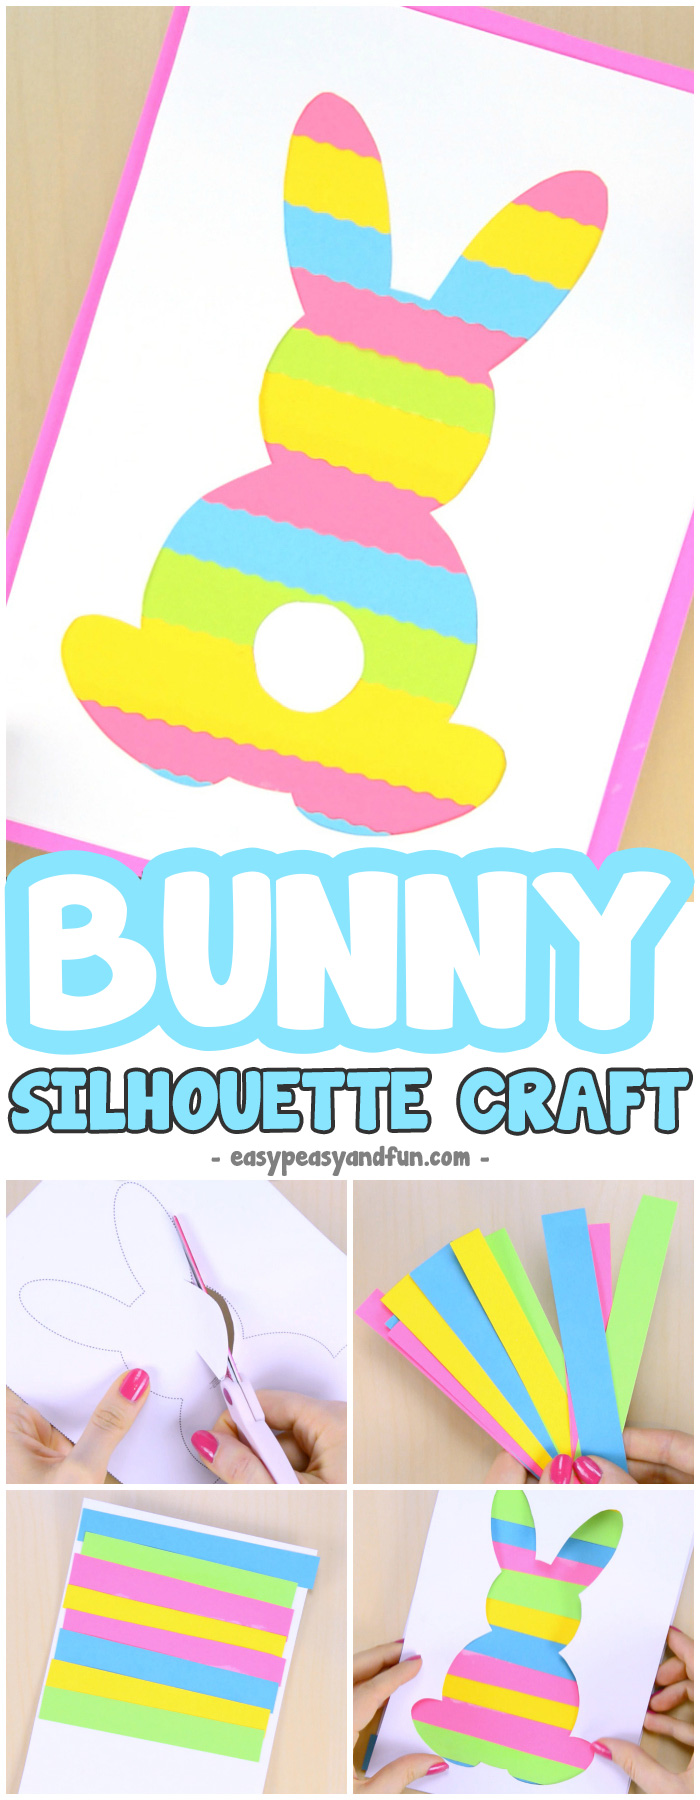 Easter Silhouette Printable Craft for Kids to Make #Eastercrafts #craftsforkids #activitiesforkids